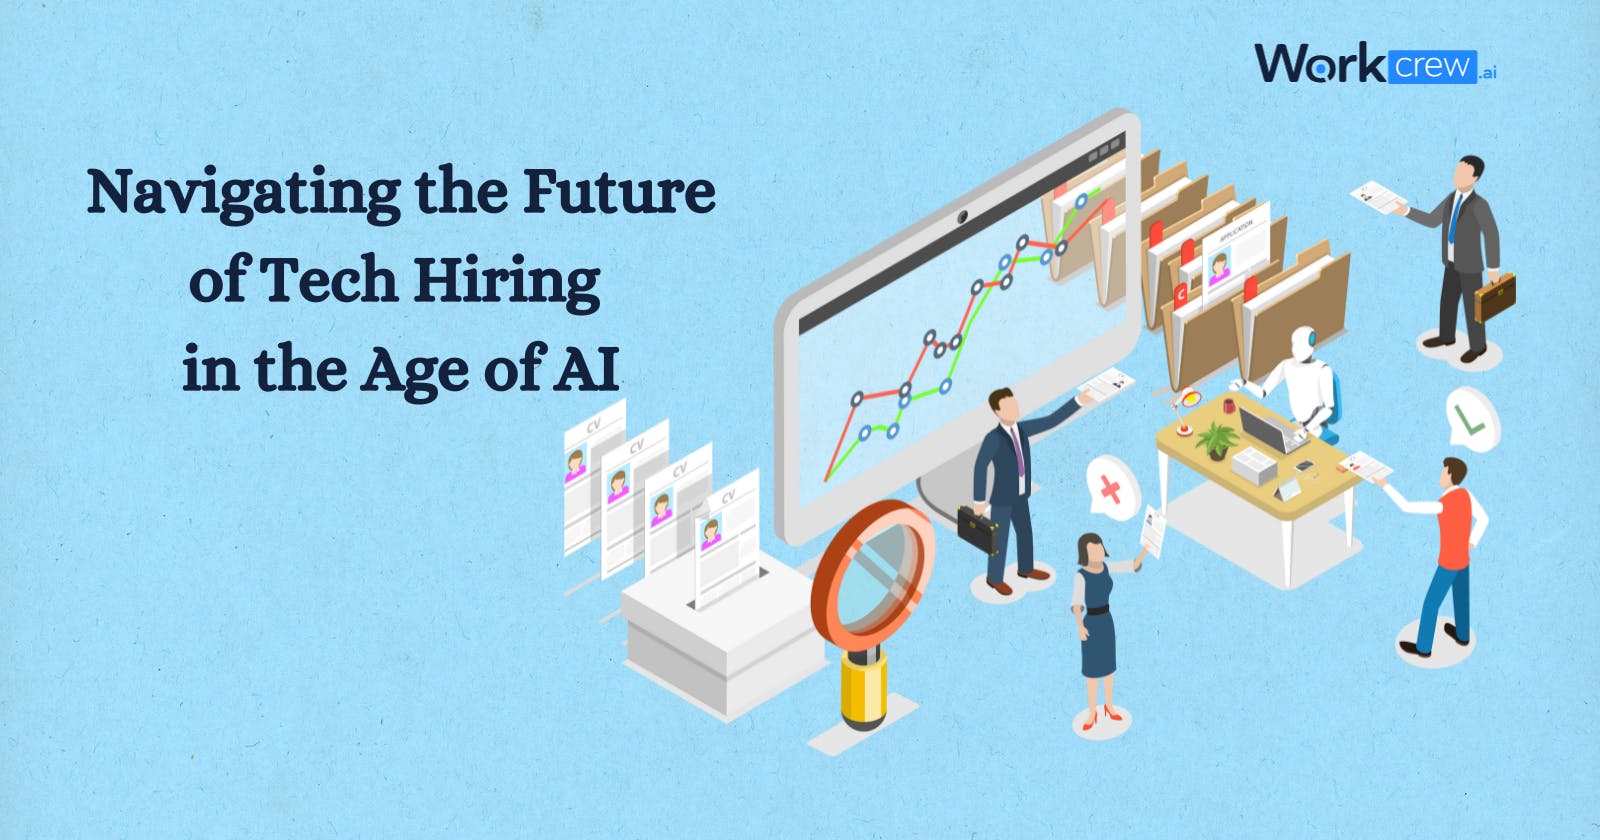 Navigating the Future of Tech Hiring in the Age of AI"